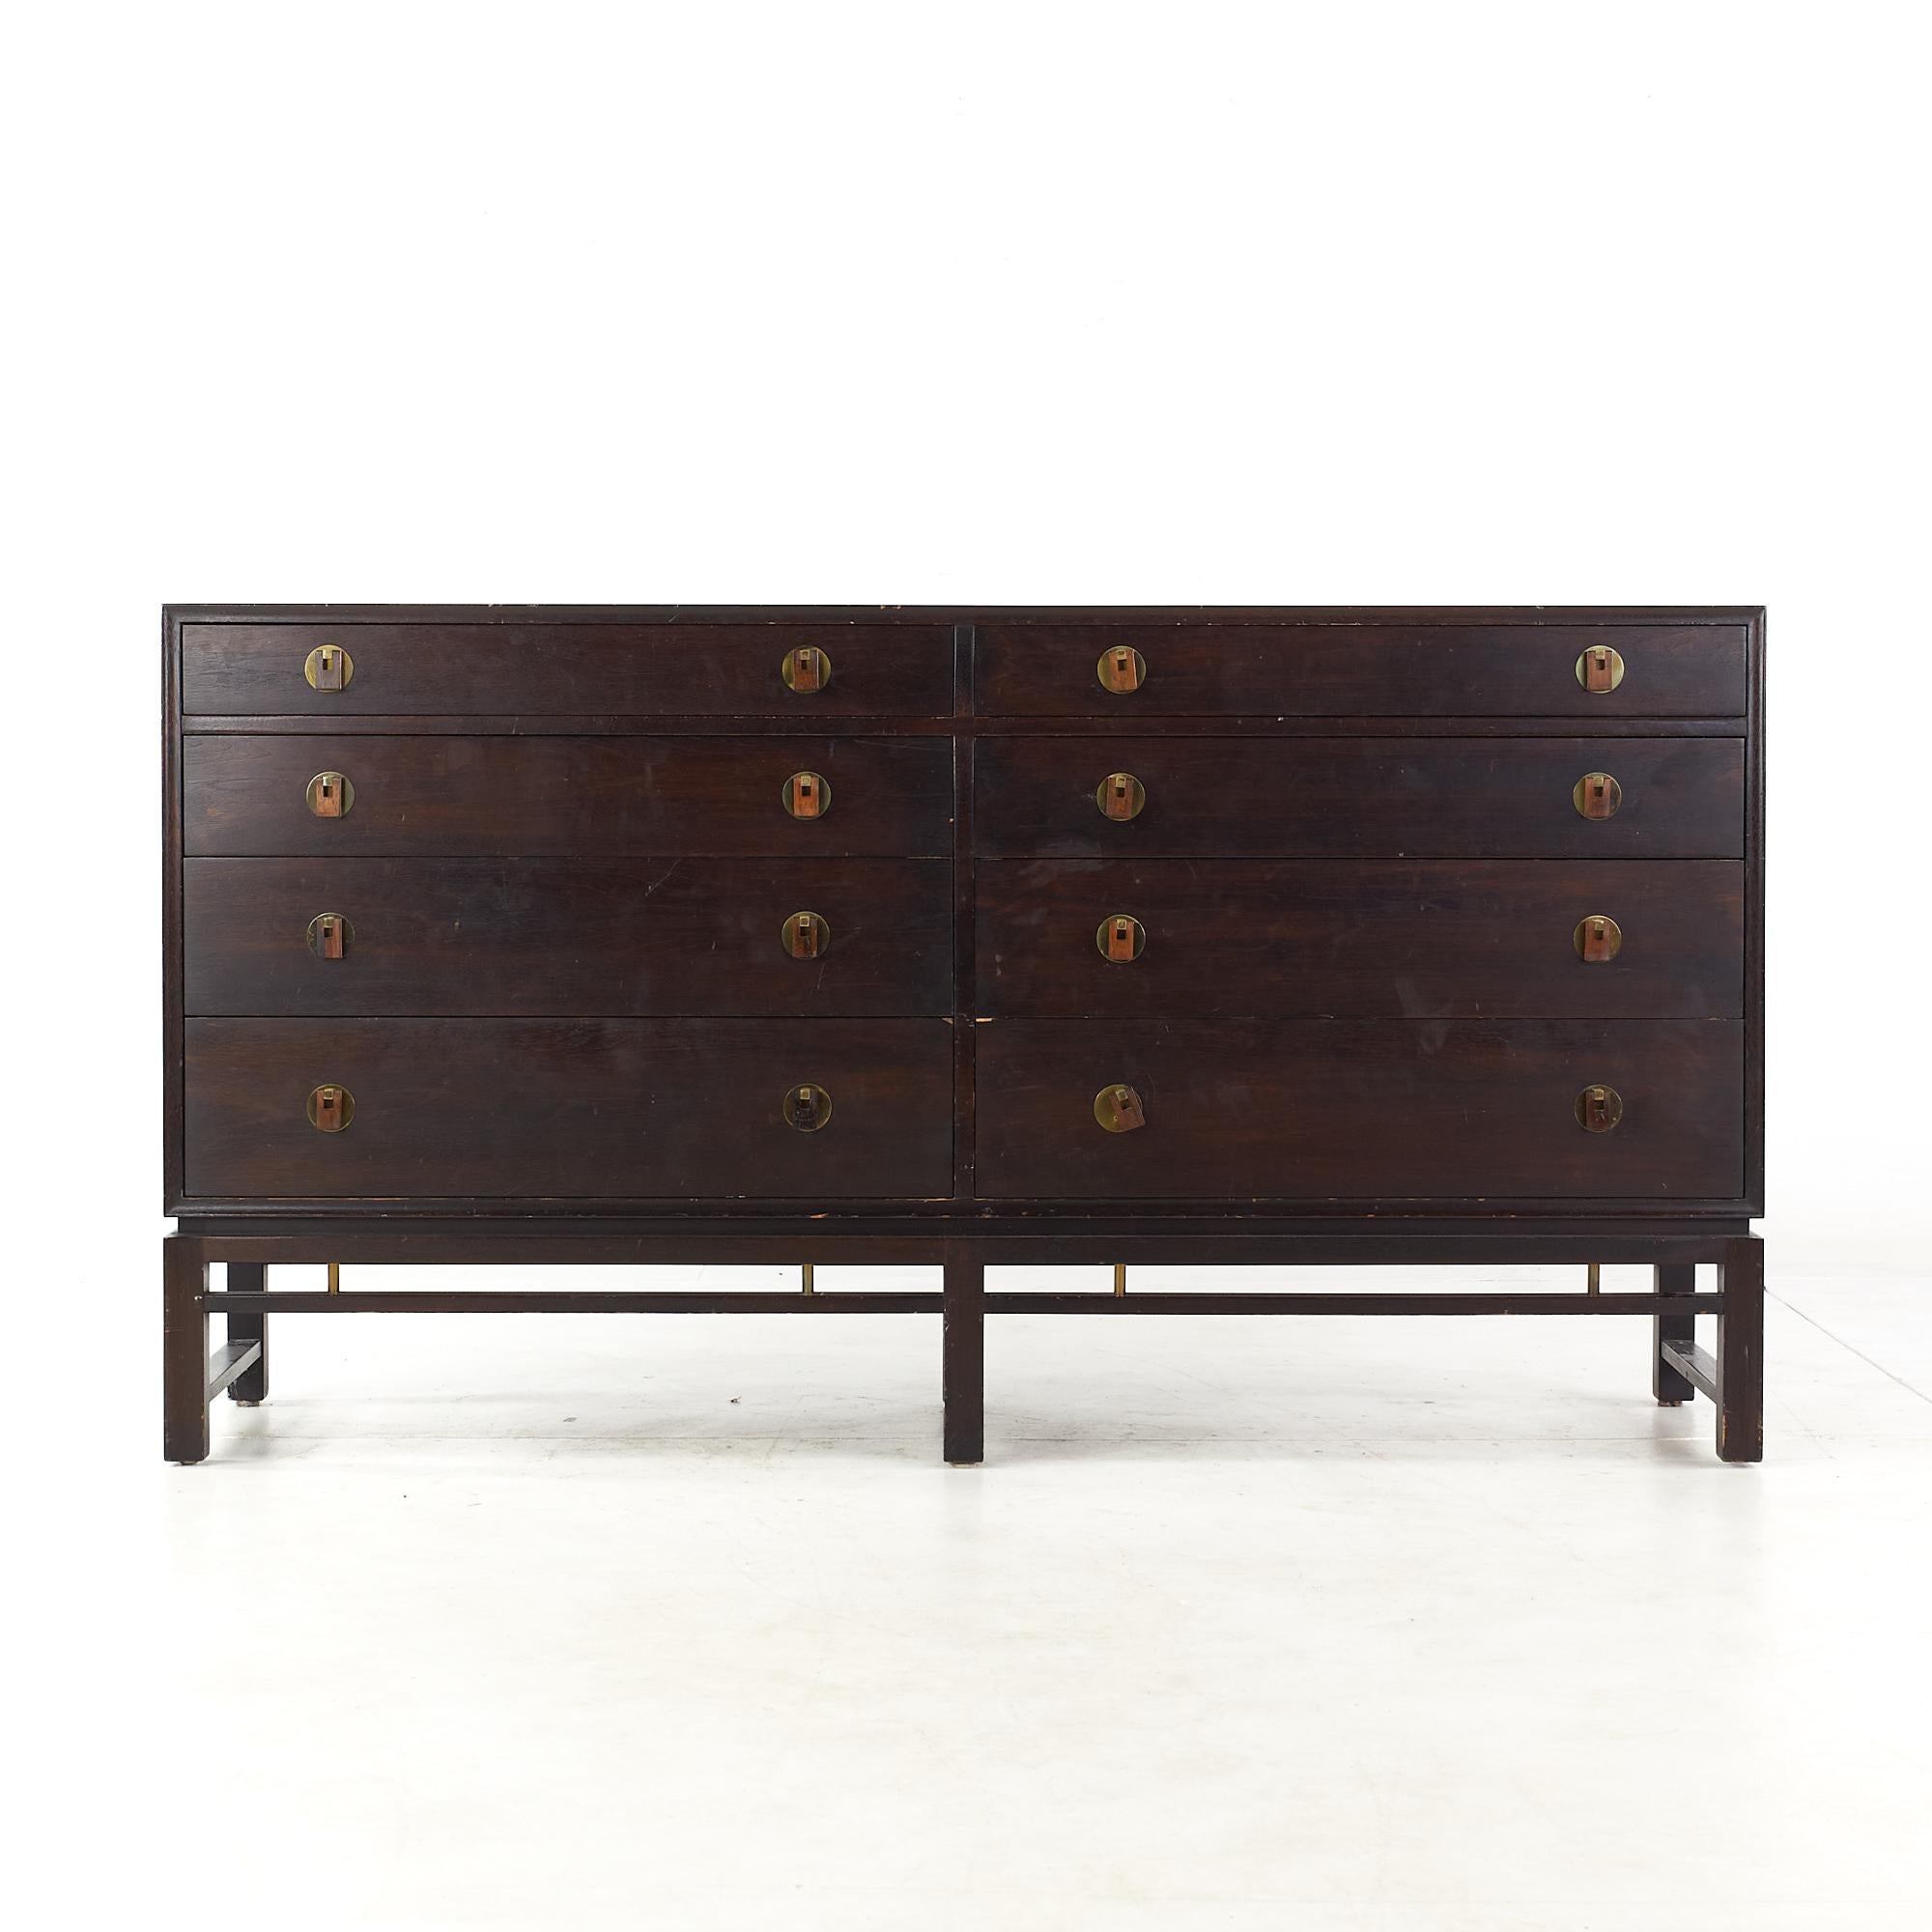 Edward wormley for dunbar mid century 8 drawer dresser.

This dresser measures: 65.25 wide x 18 deep x 35.25 inches high.

All pieces of furniture can be had in what we call restored vintage condition. That means the piece is restored upon